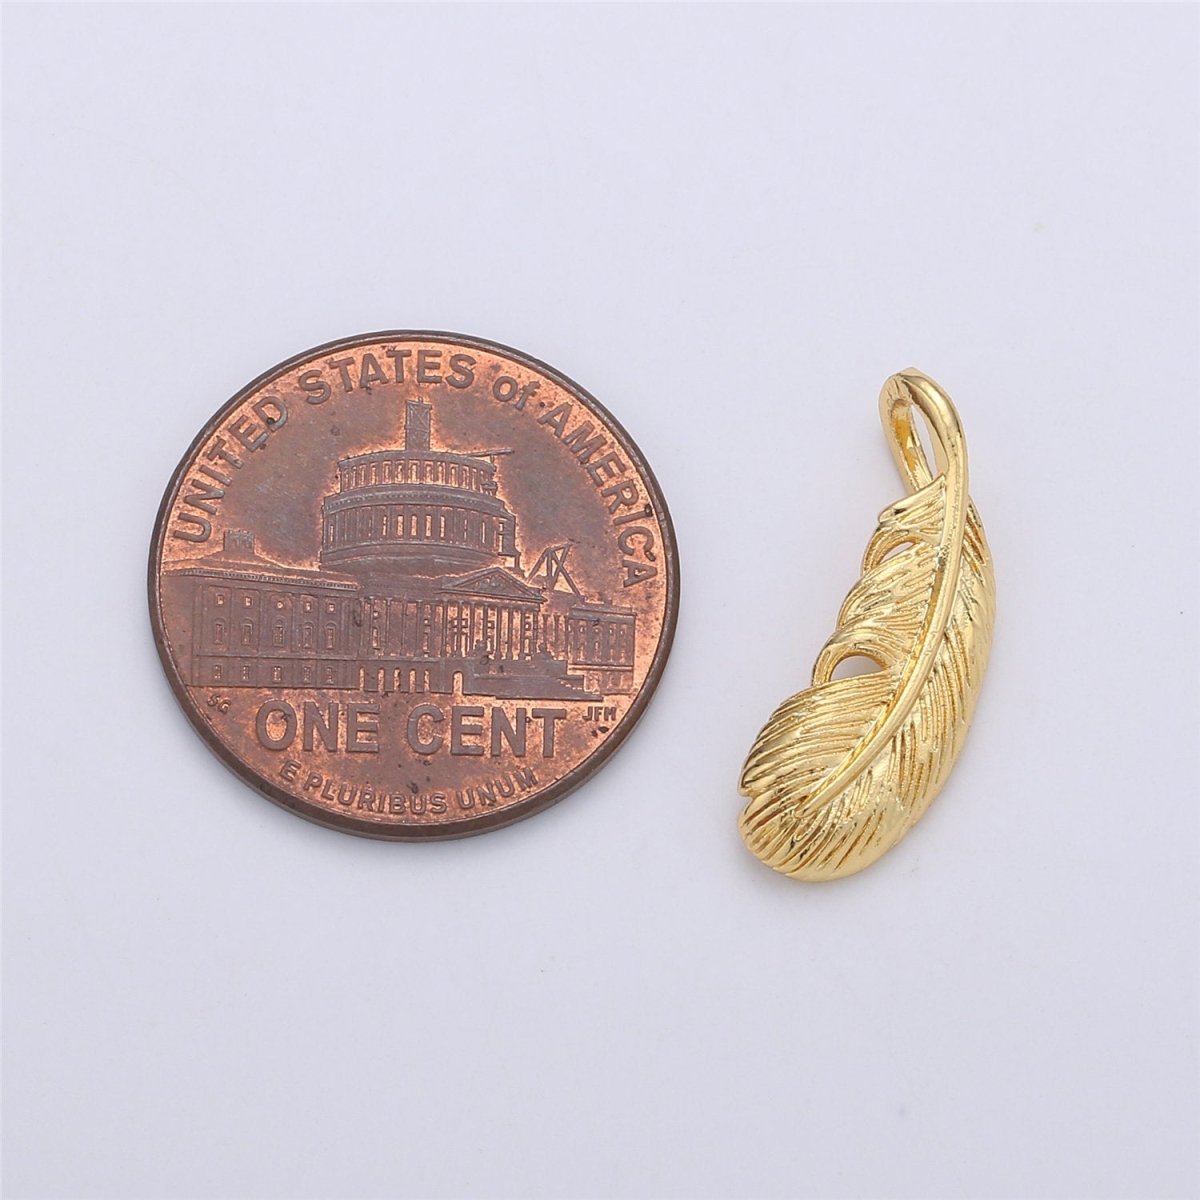 14k Gold Filled feather charm 20x9mm Tiny Feather Charms Dainty Feathers Nature Spiritual Tribal Boho Jewelry Supplies Findings I-590 - DLUXCA